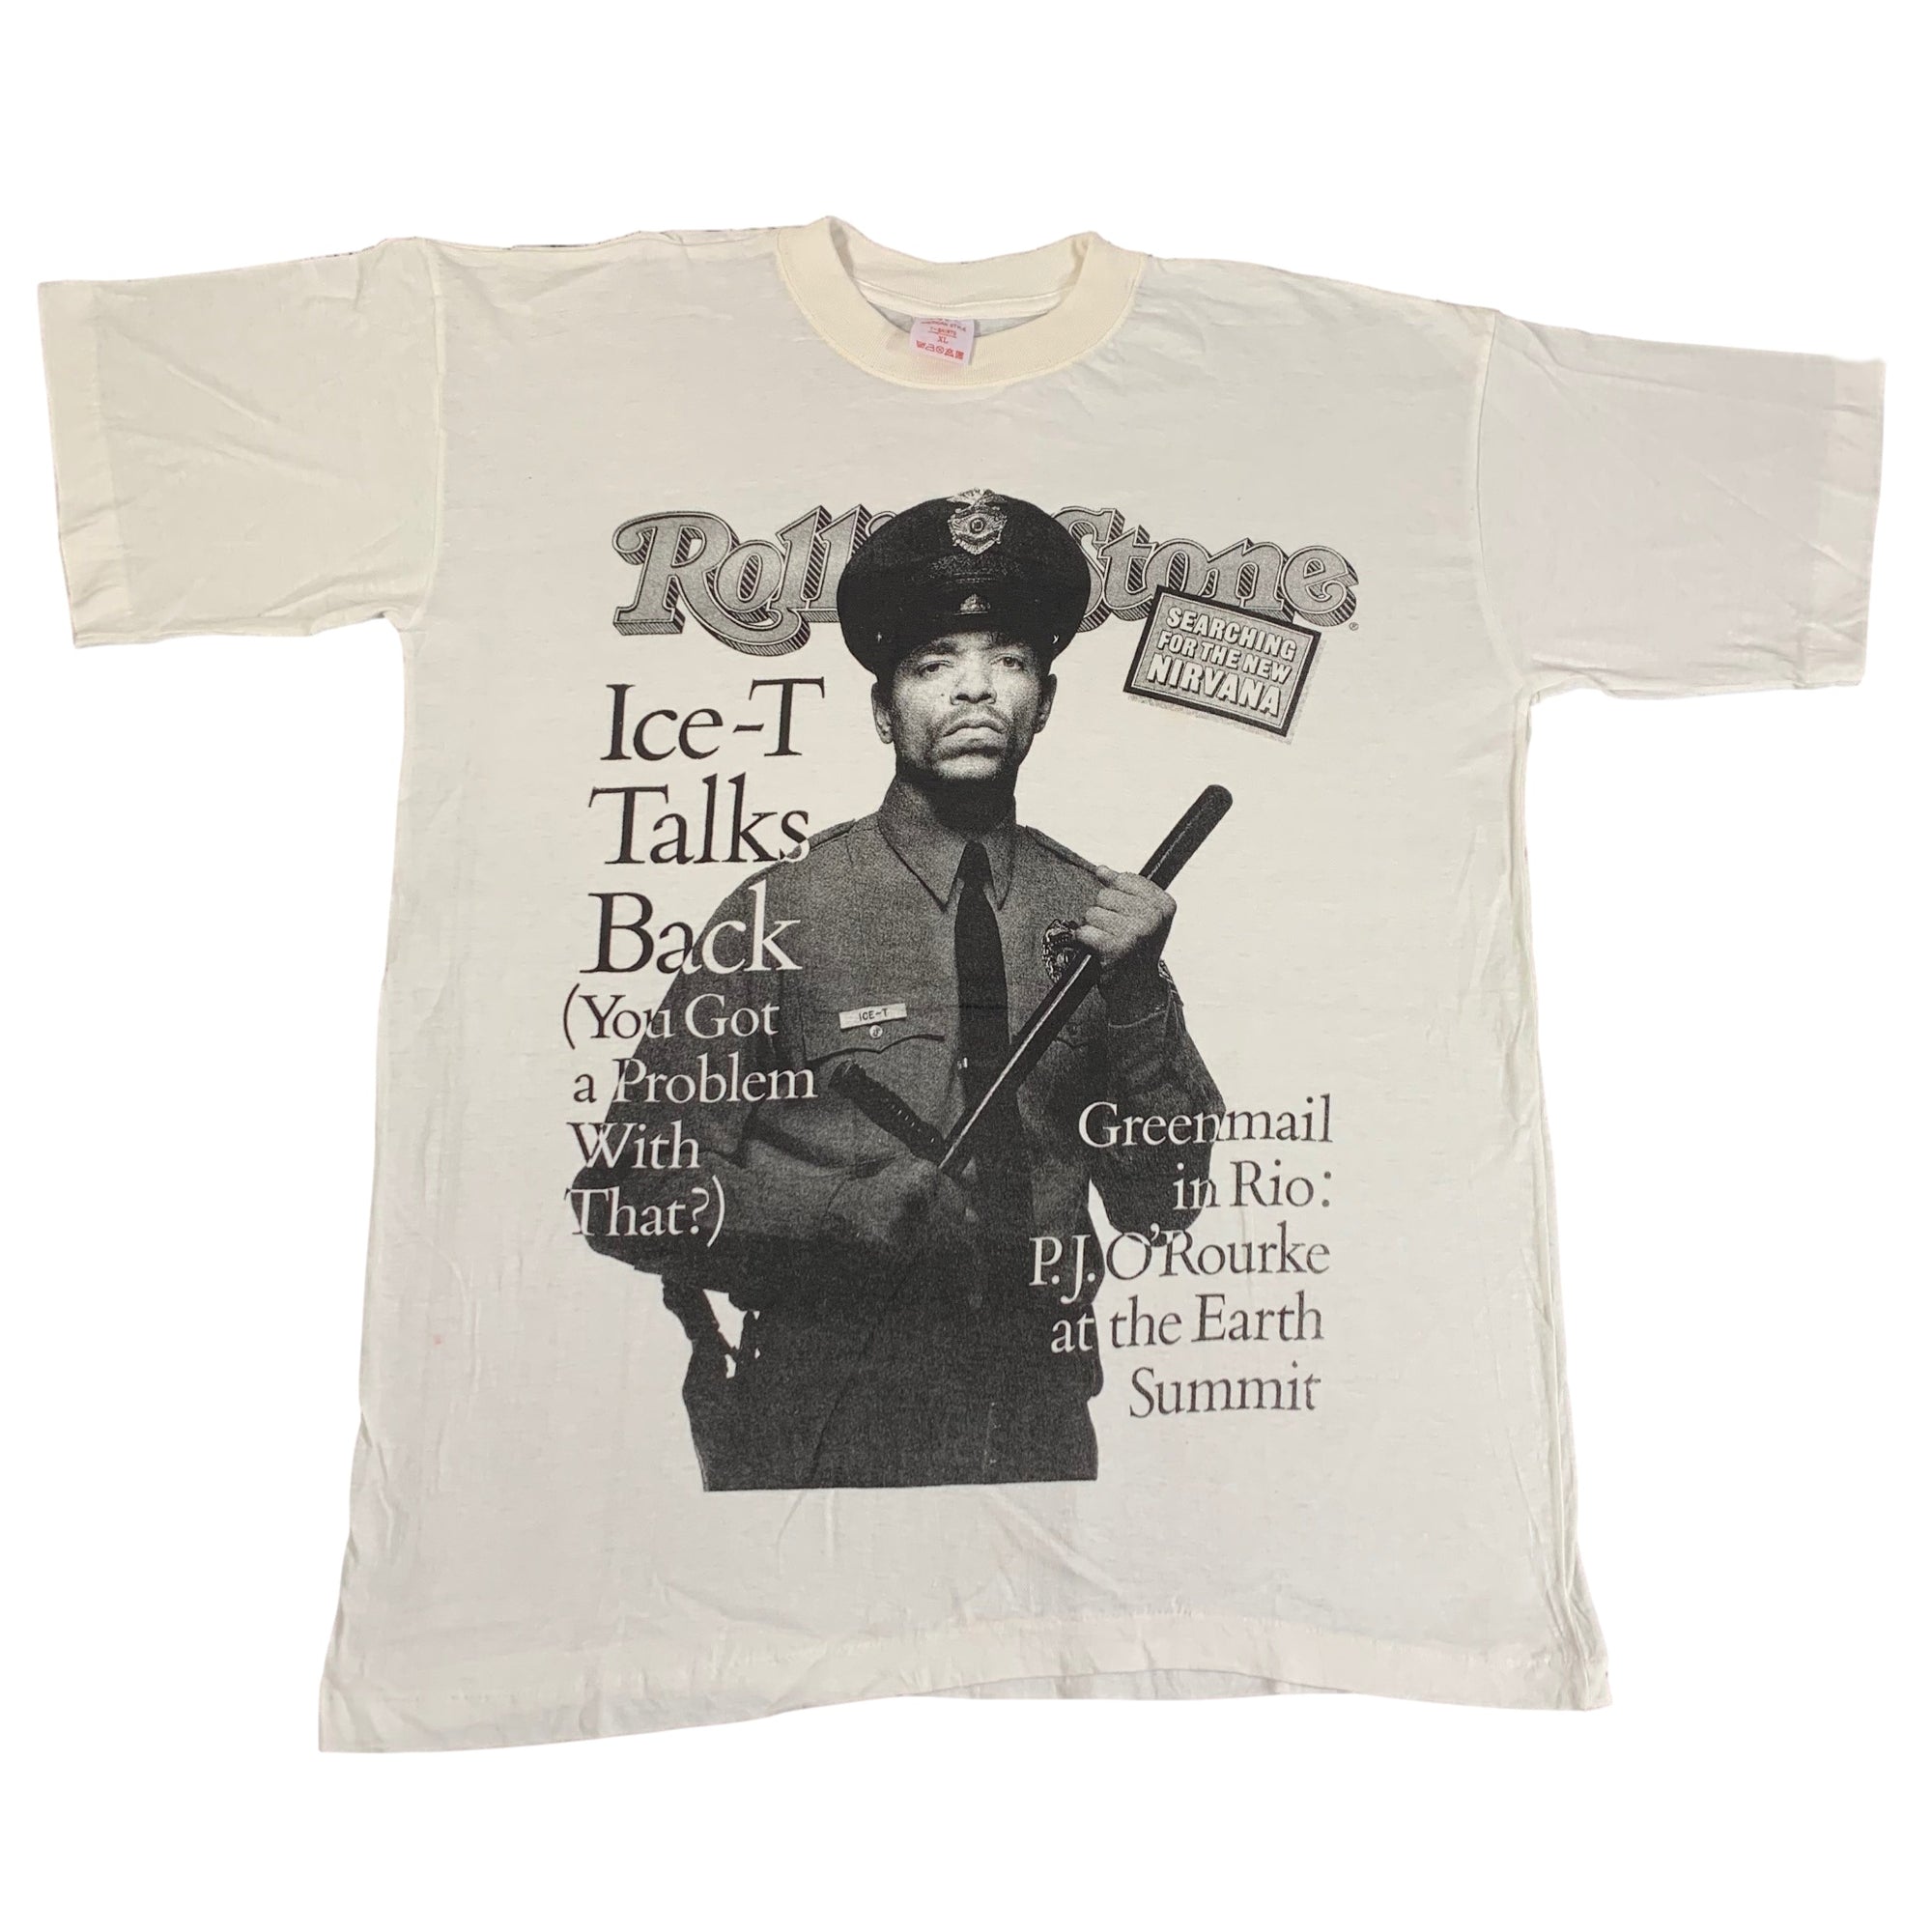 Vintage Ice-T "Rolling Stone Cover" T-Shirt - jointcustodydc